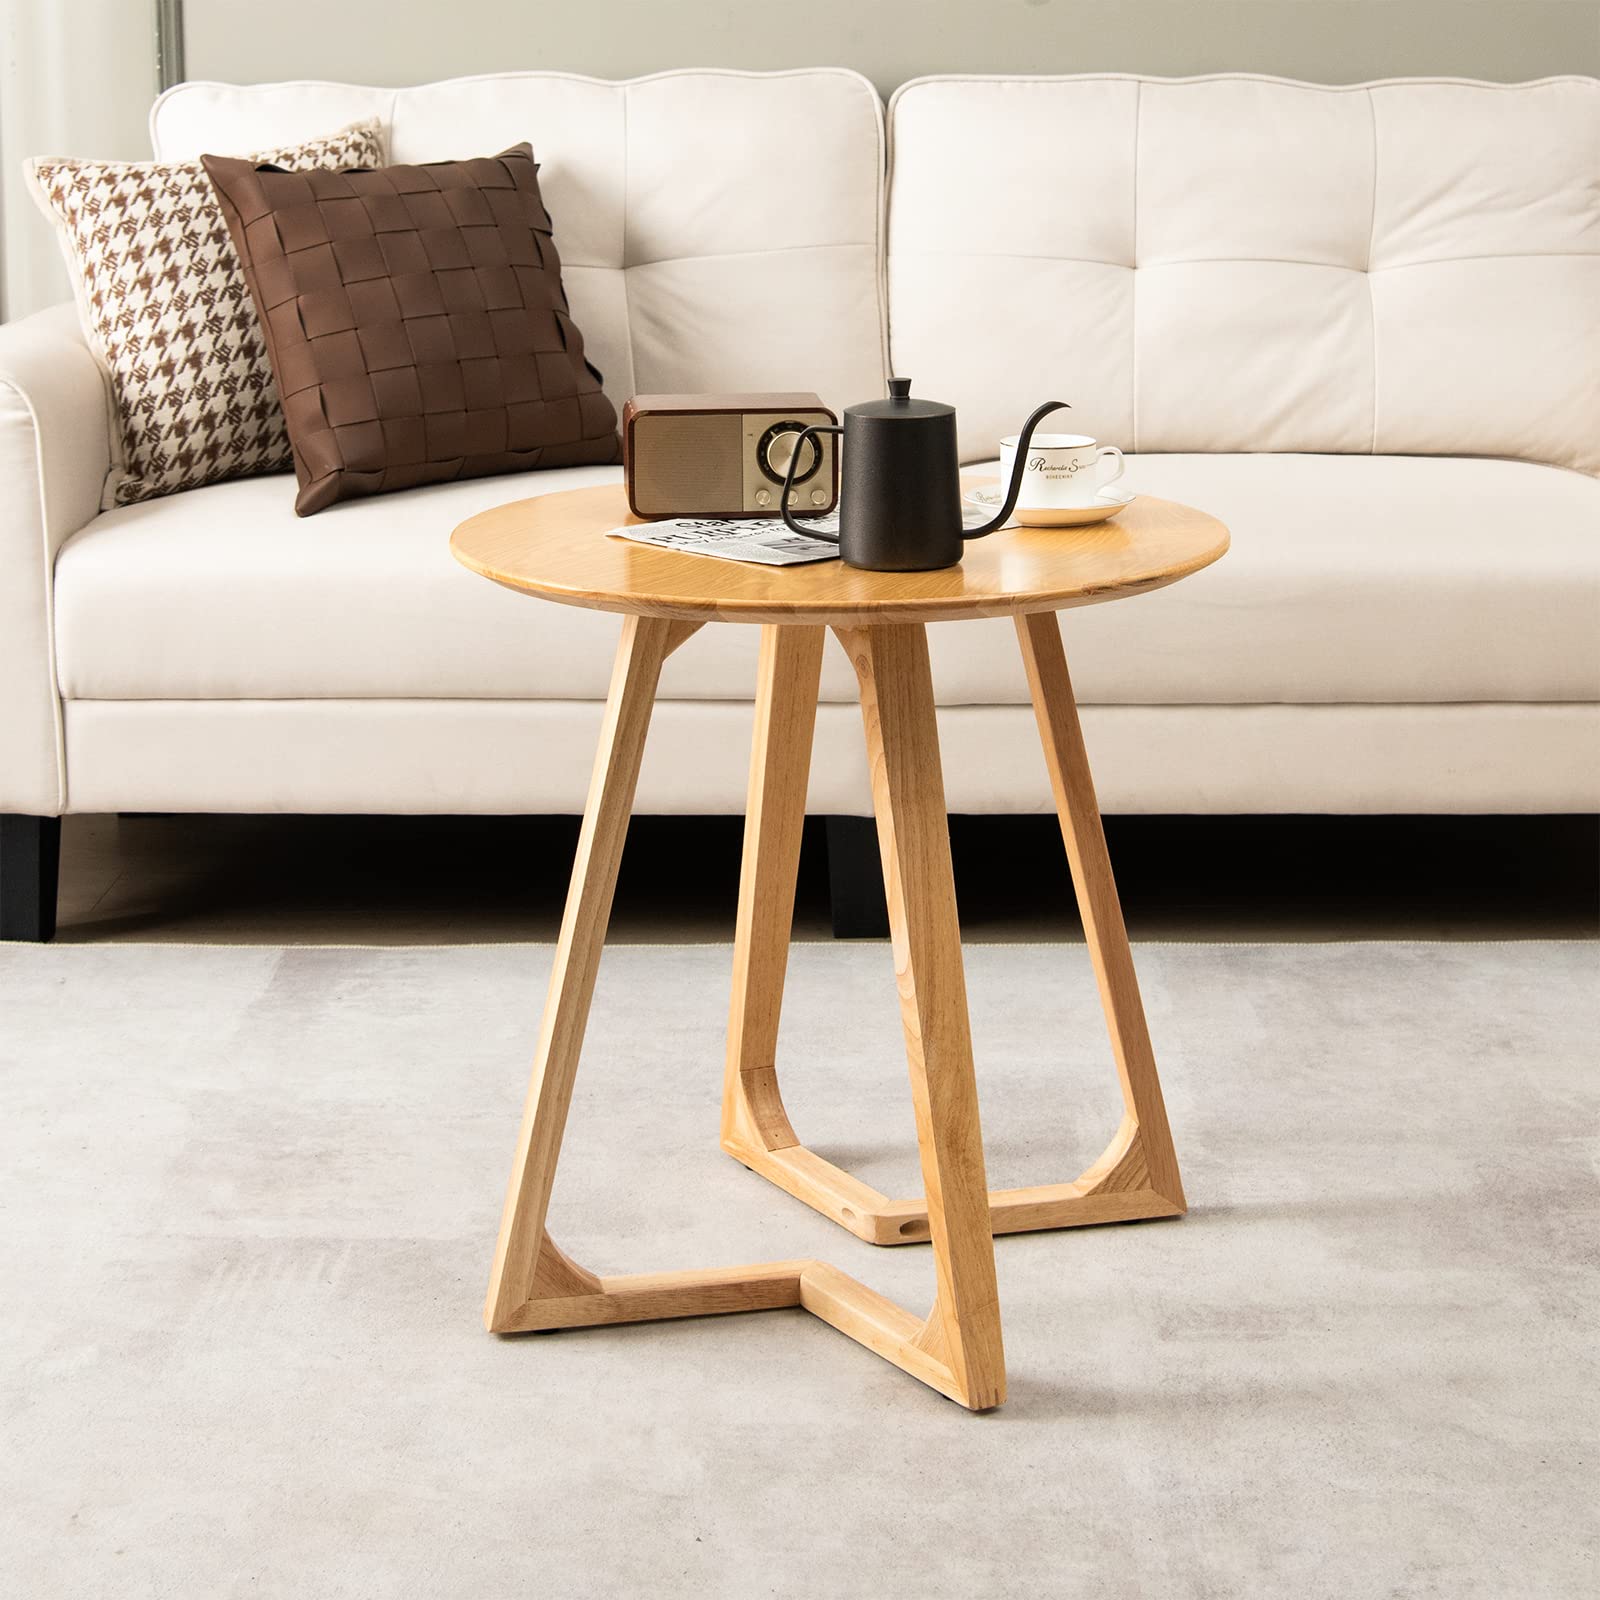 Giantex 24" Round End Table - Rubber Wood Sofa Side Table with Adjustable Foot Pads, Natural